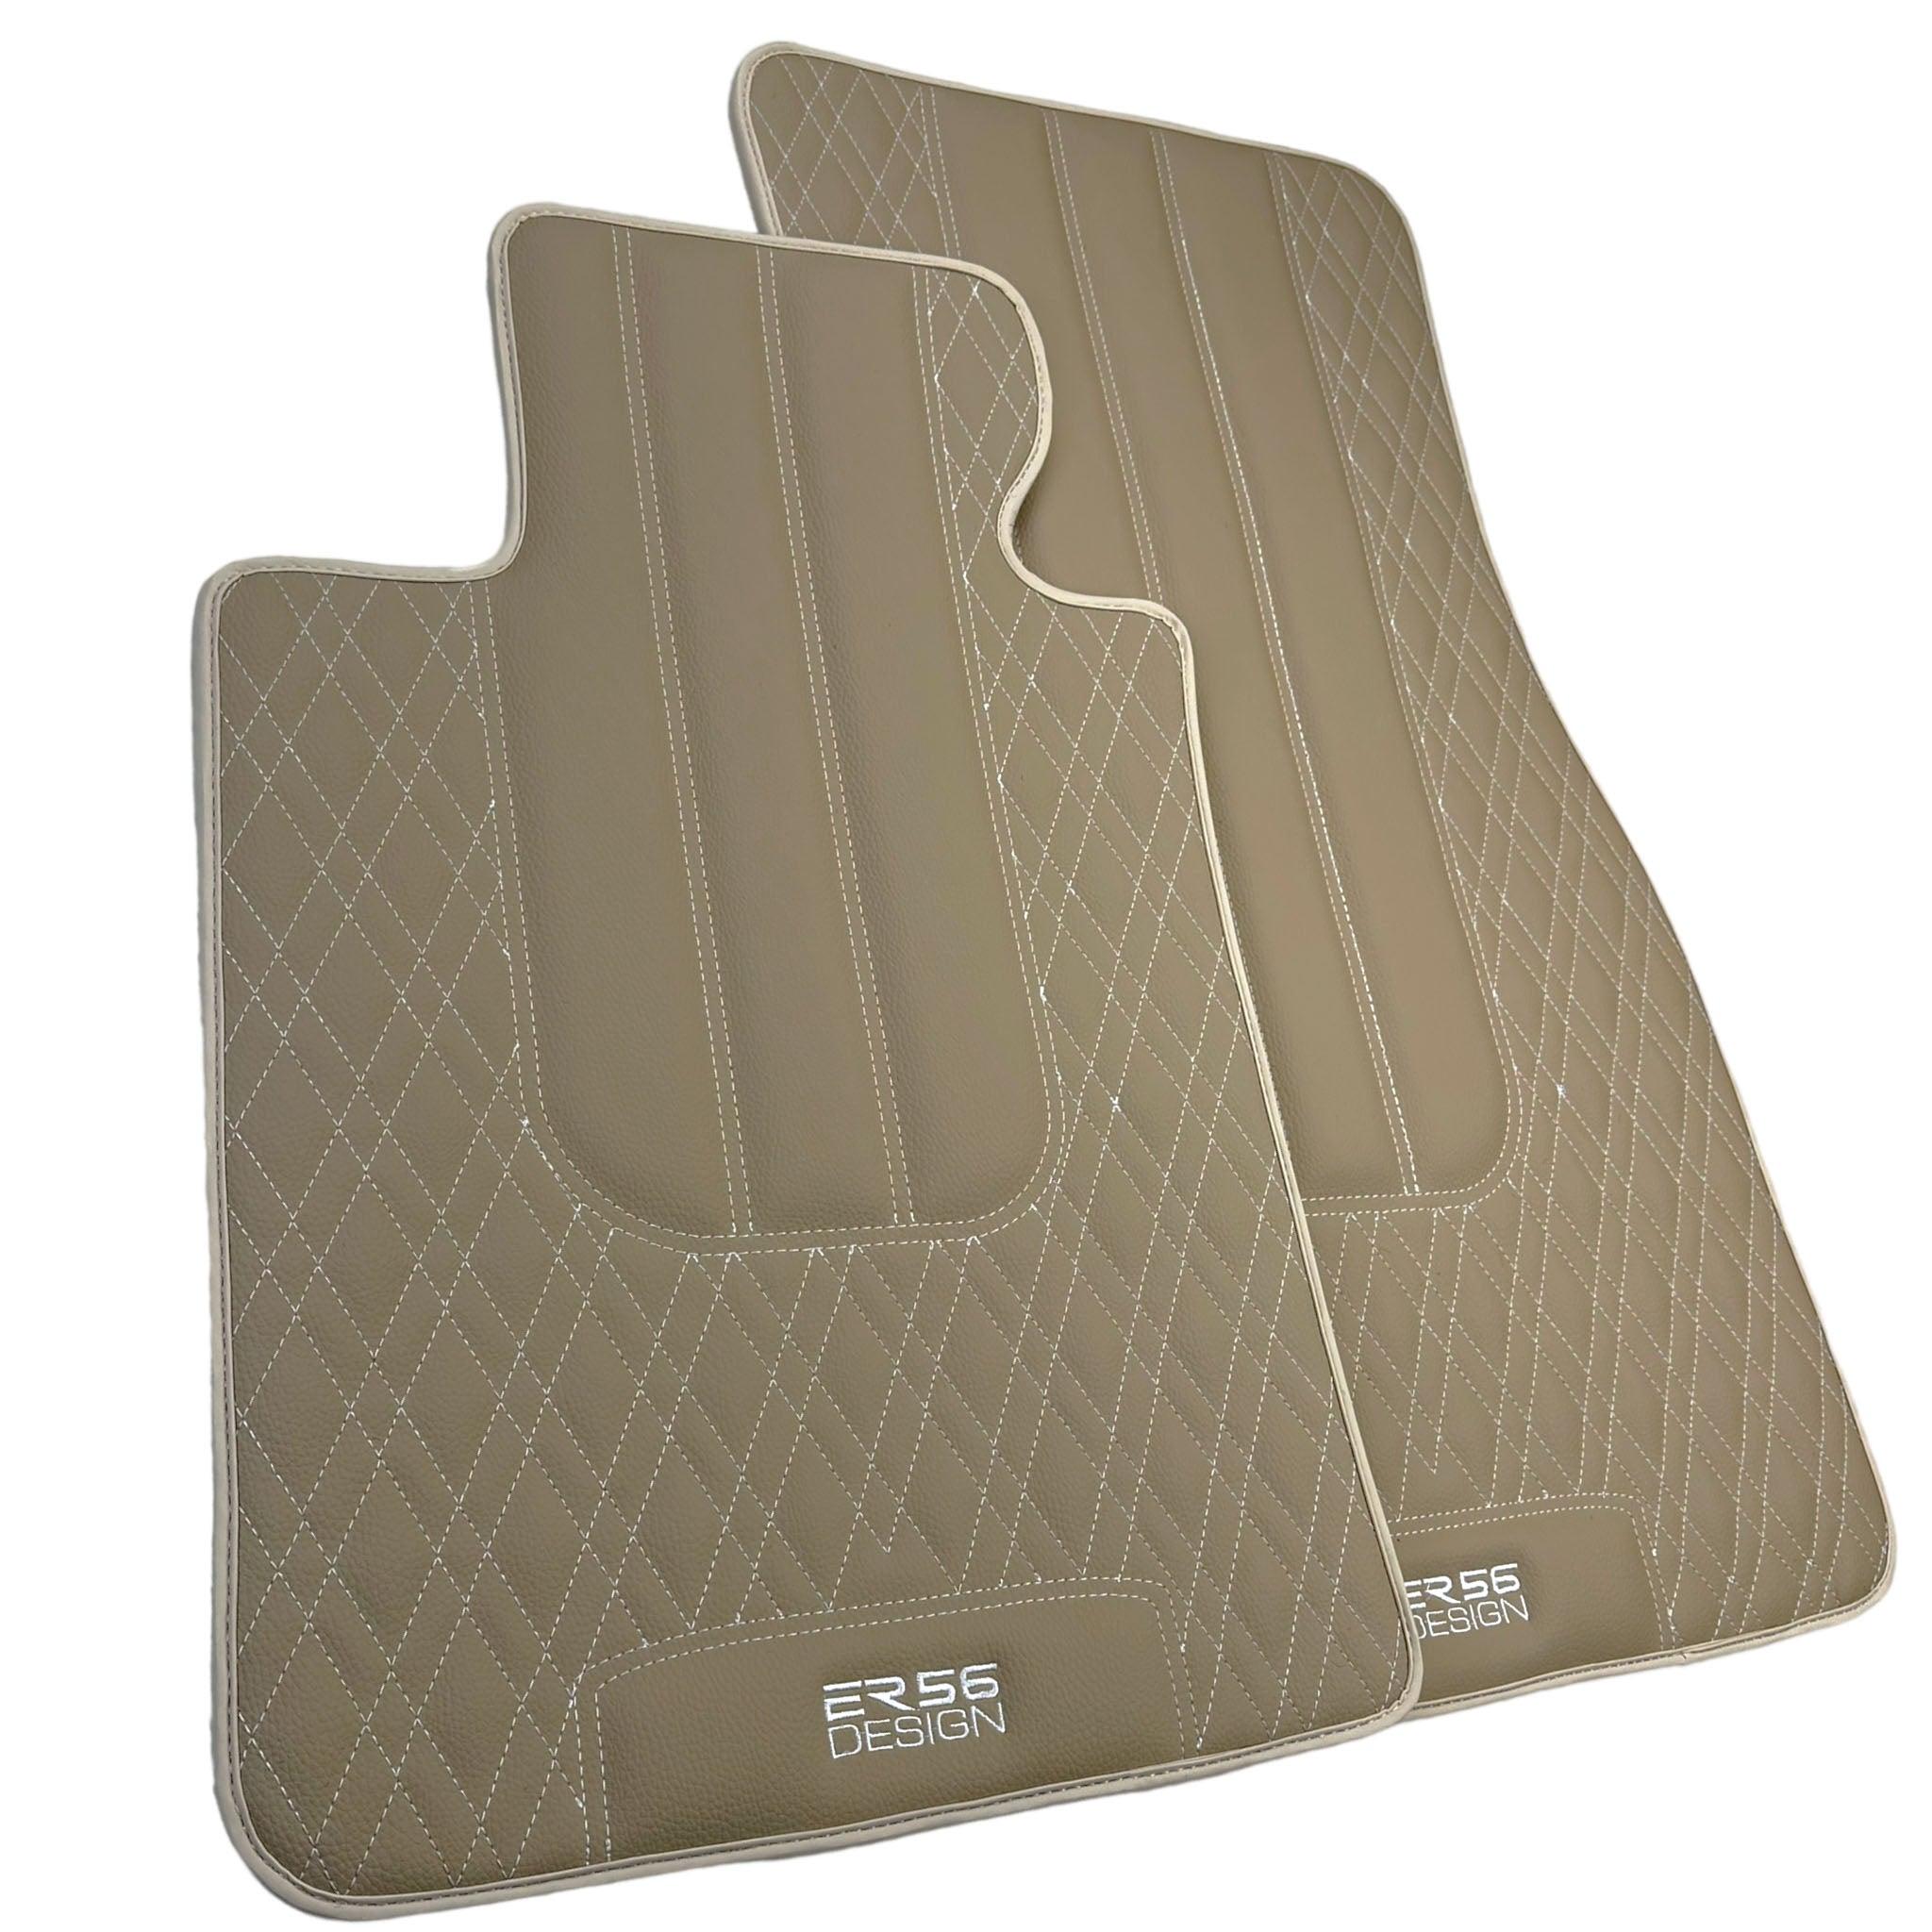 Beige Leather Floor Mats For BMW X6M E71 SUV